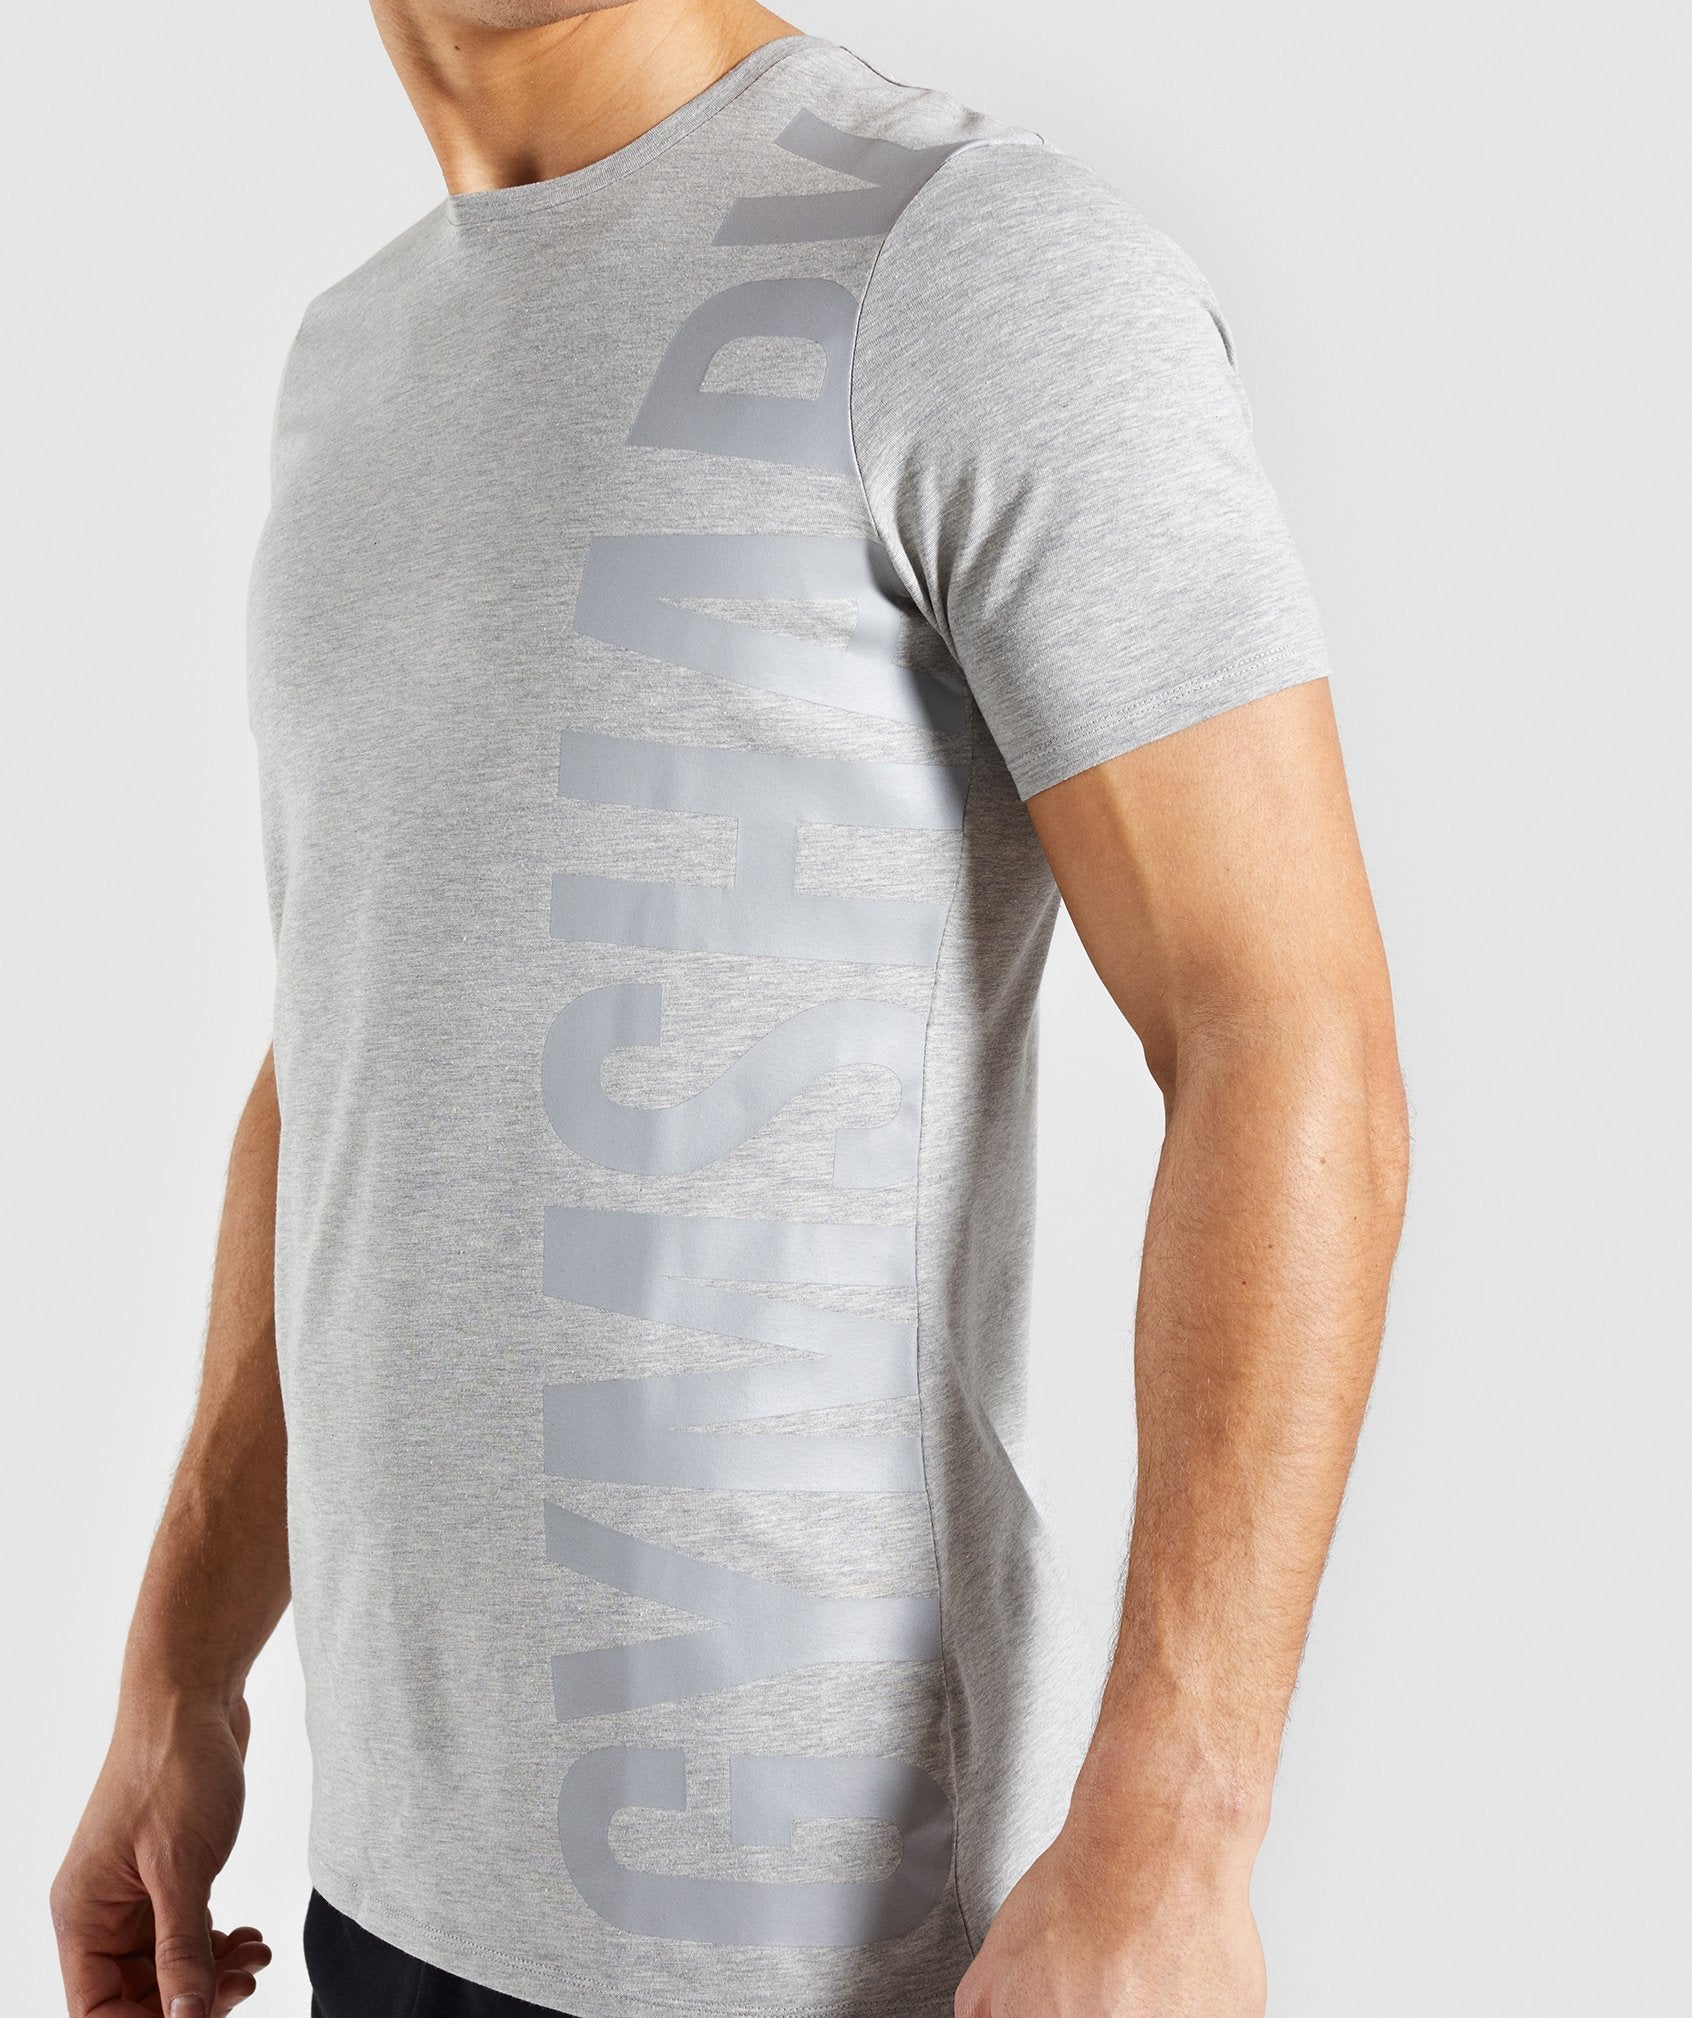 Align T-Shirt in Light Grey - view 6